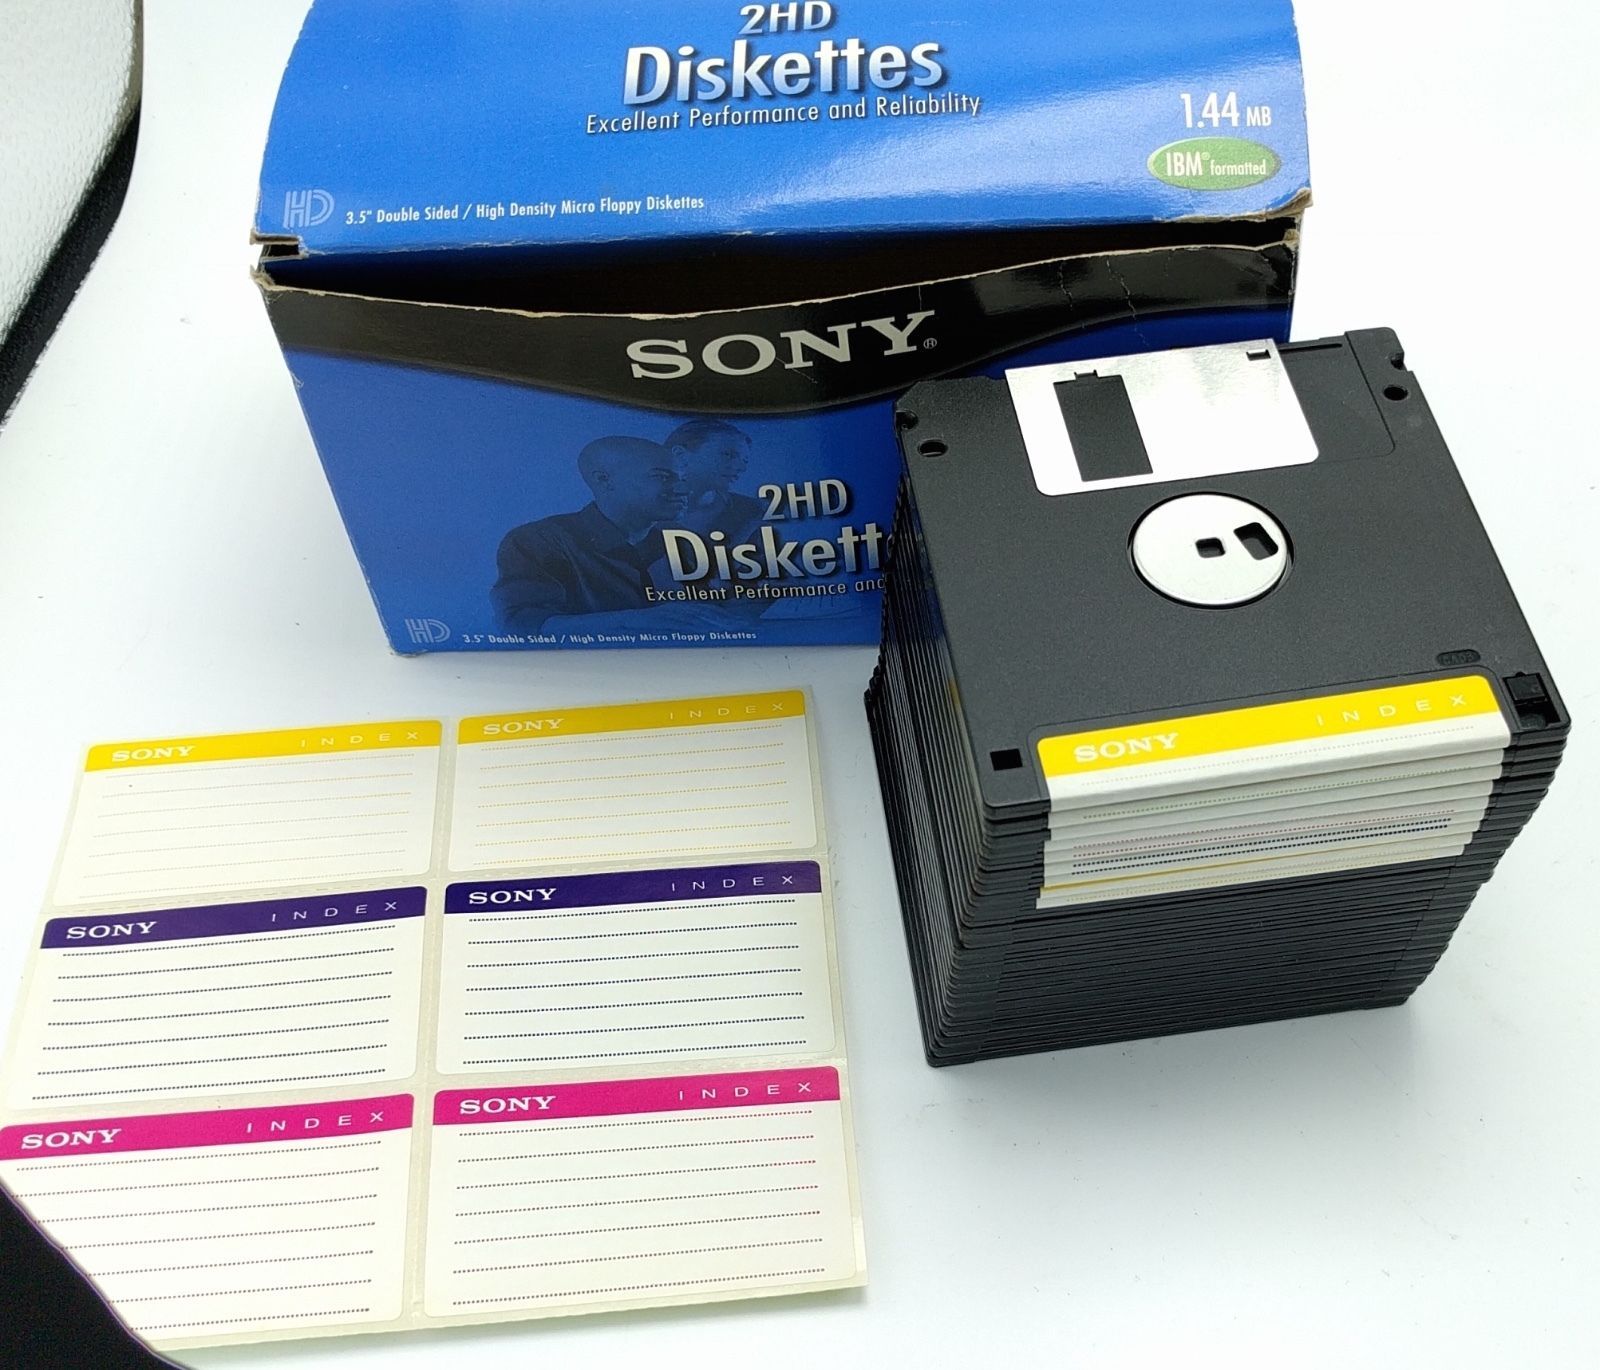 dos formated floppy disk